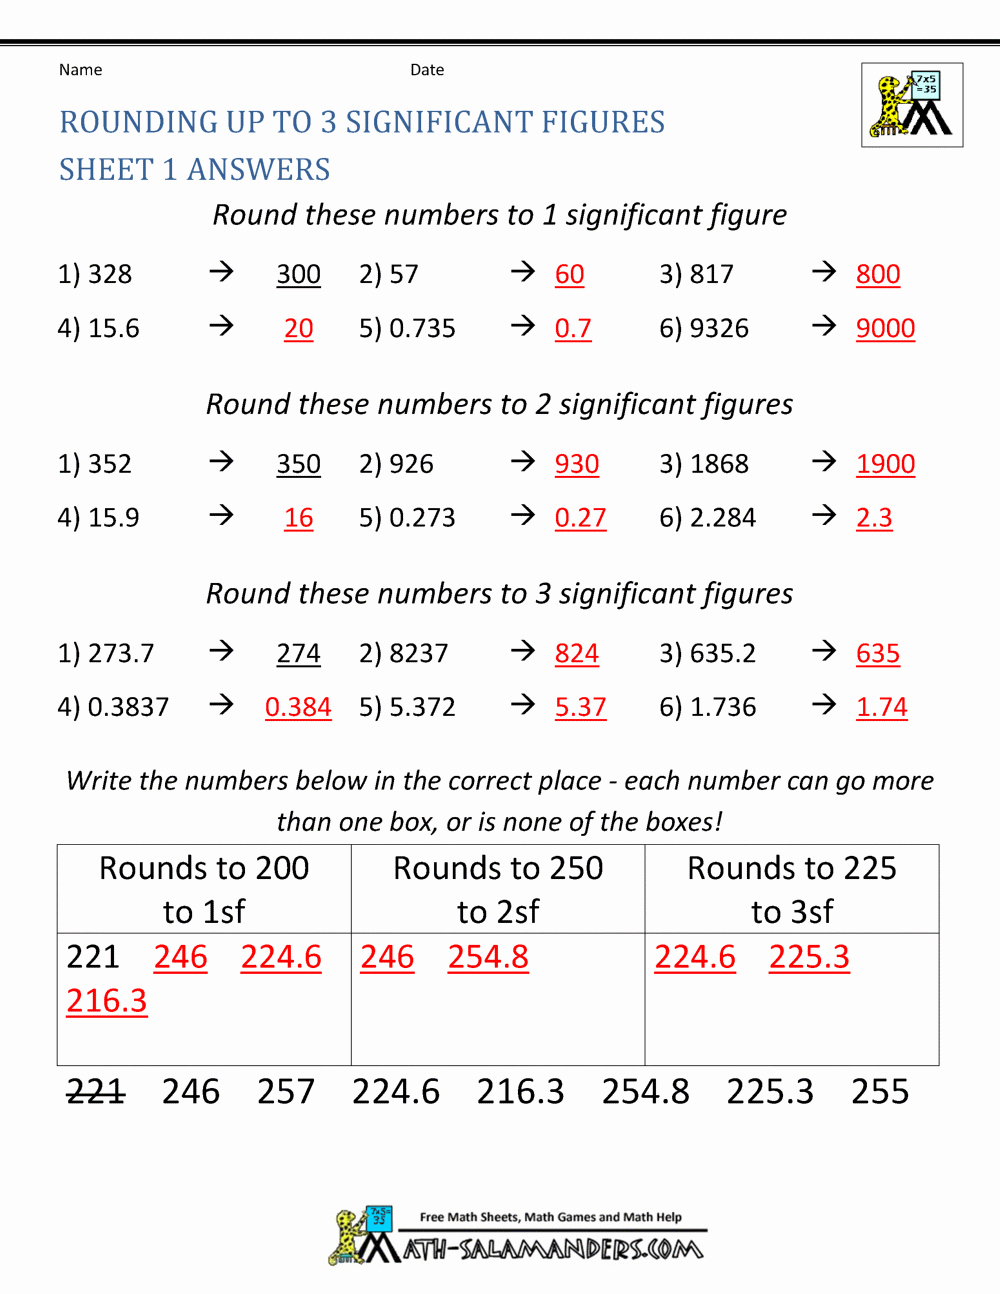 Sig Figs Worksheet with Answers Fresh Rounding Significant Figures